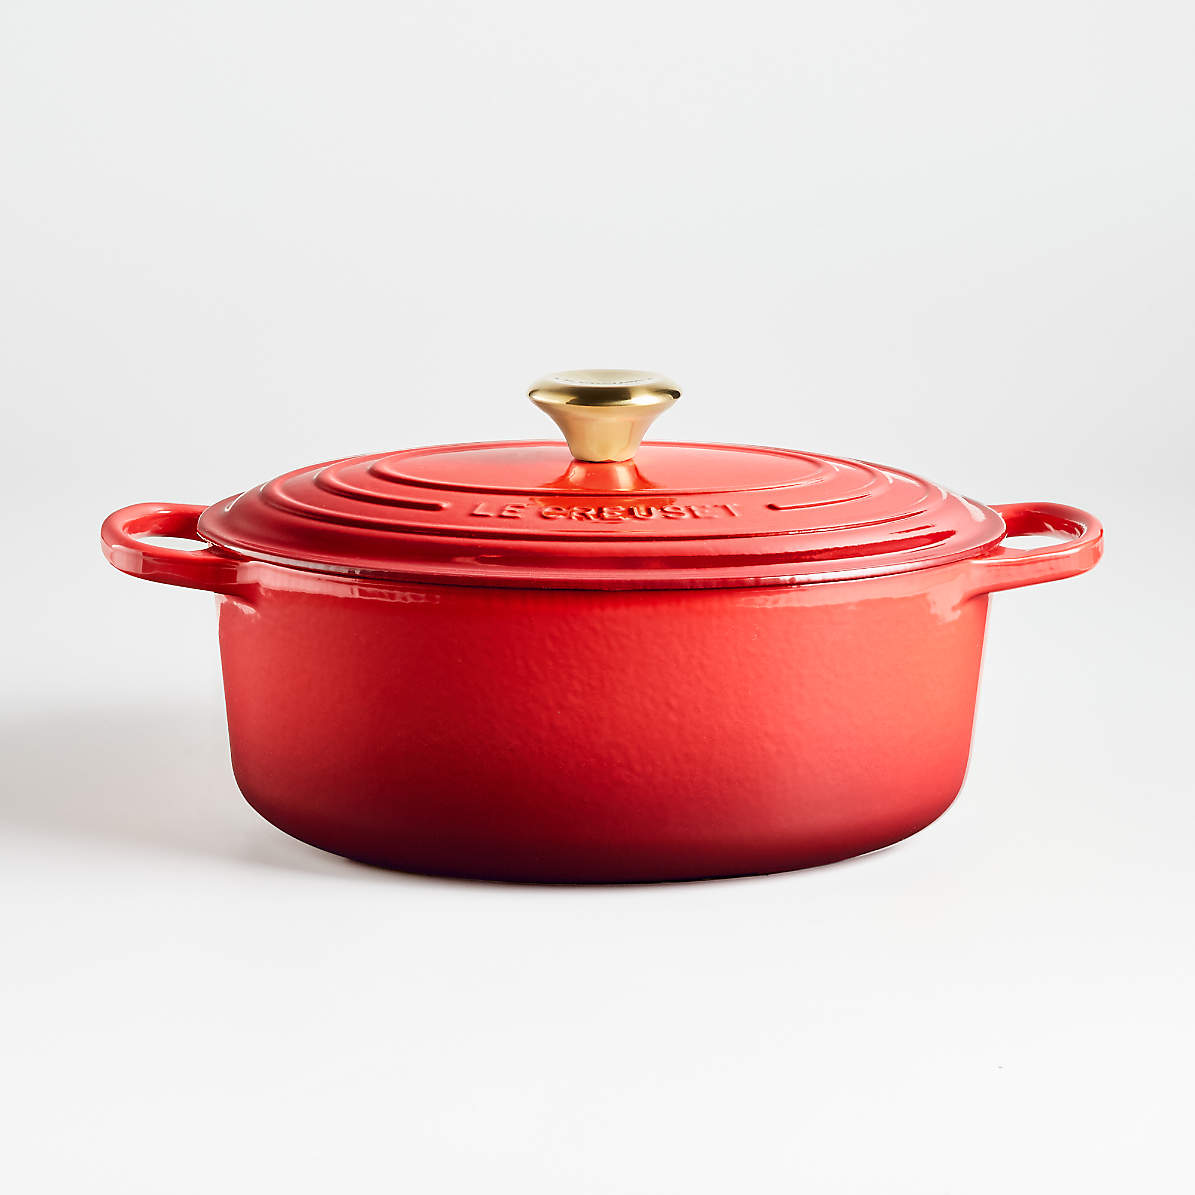 Le Creuset Signature 15.5 Quart Oval Dutch Oven with Stainless Steel Knob